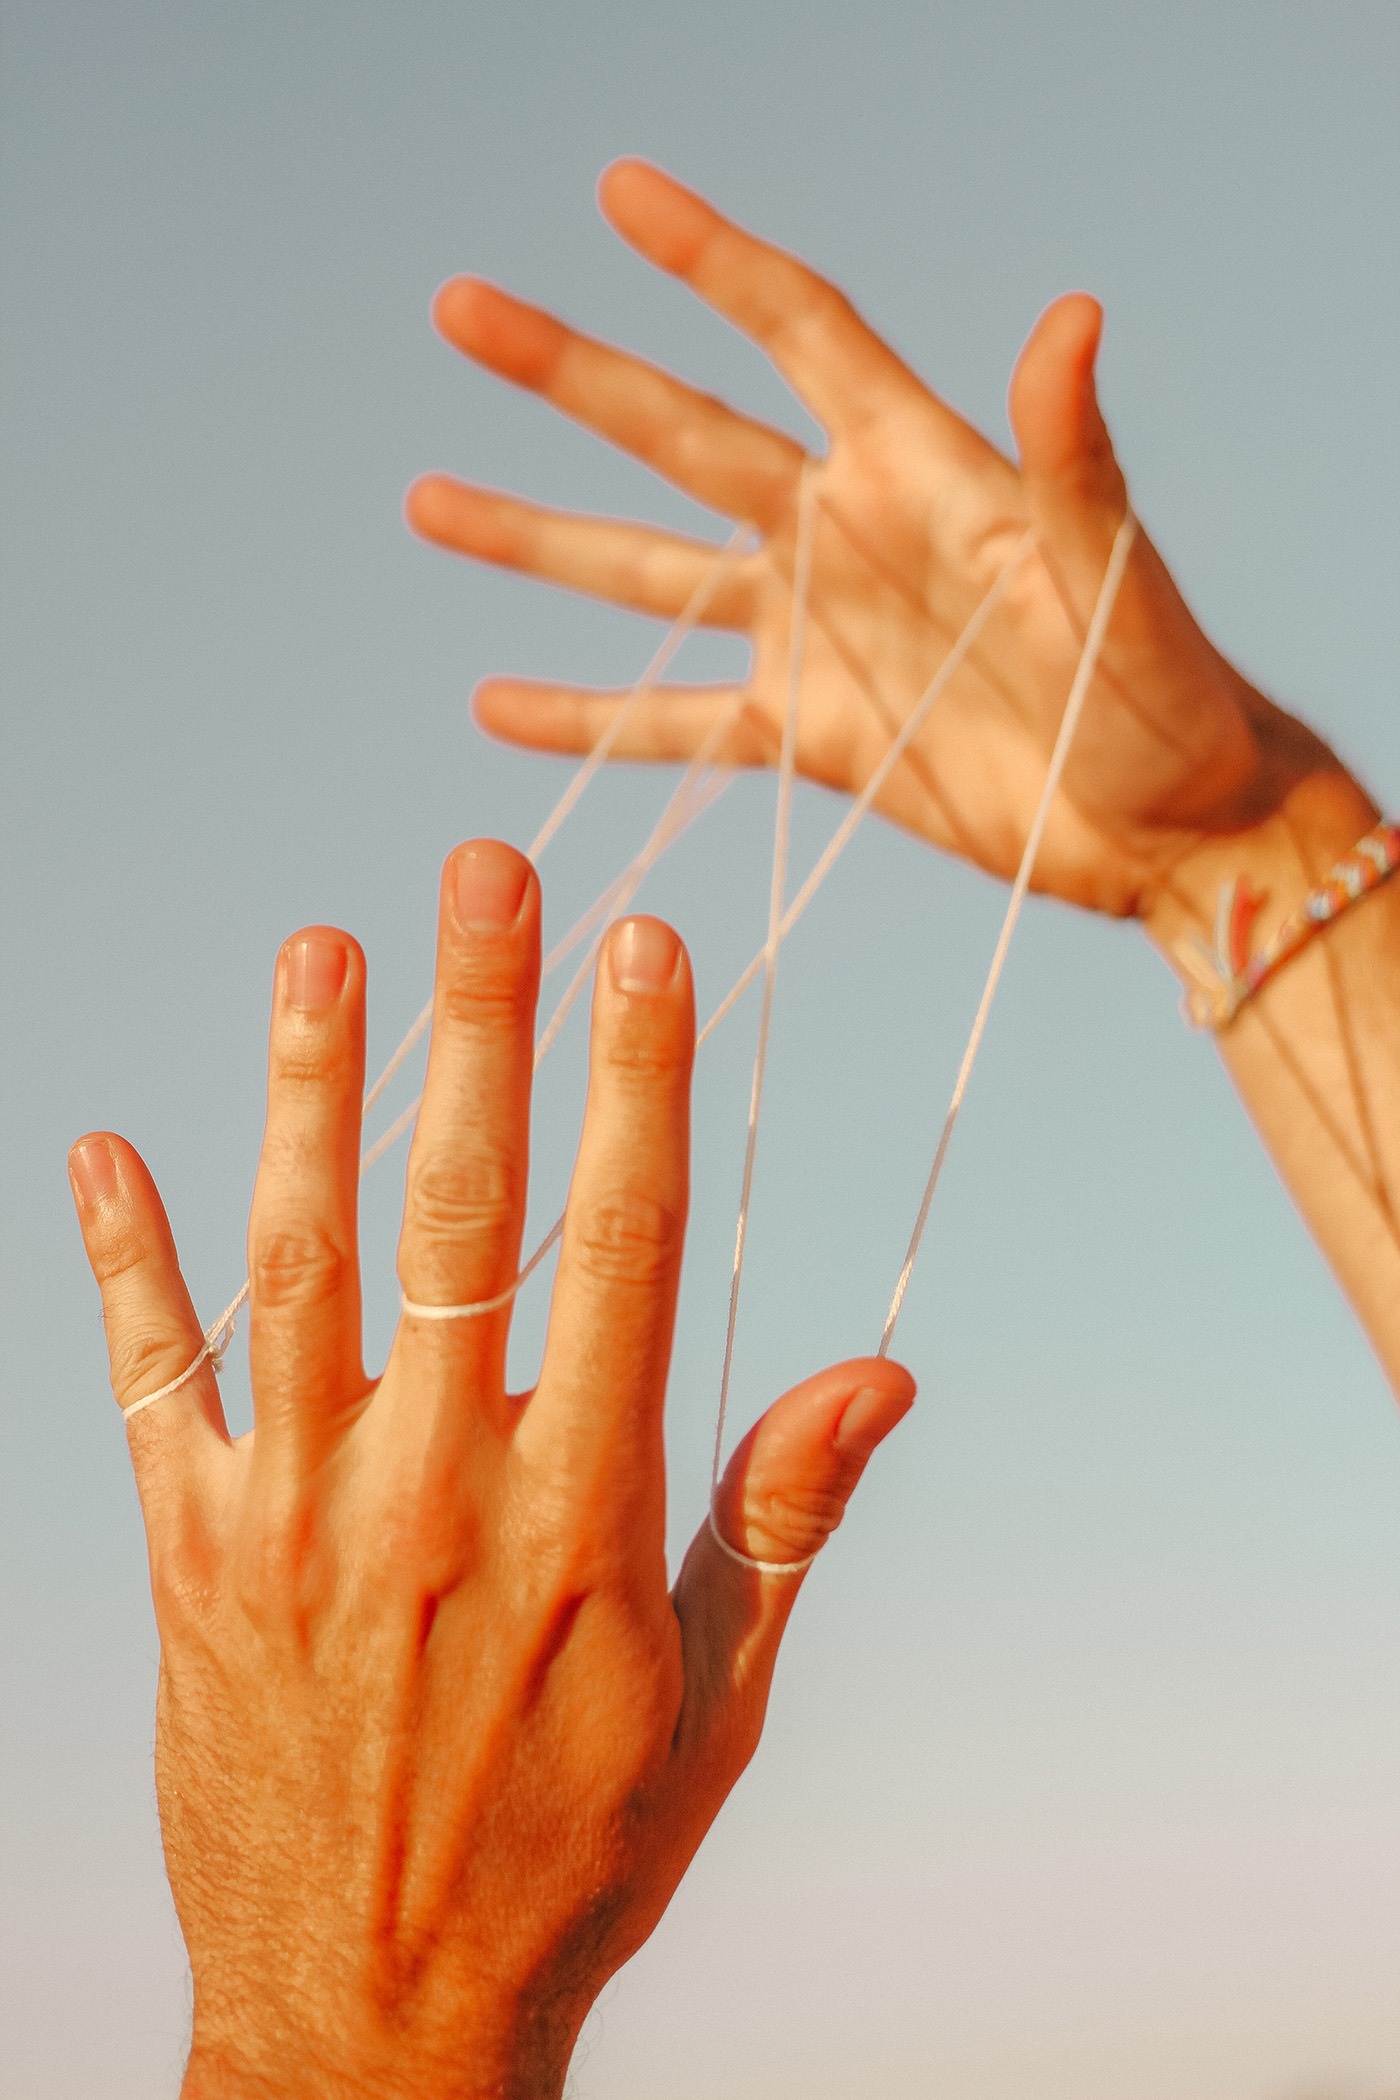 Non-gender specific hands playing cat's cradle against sky